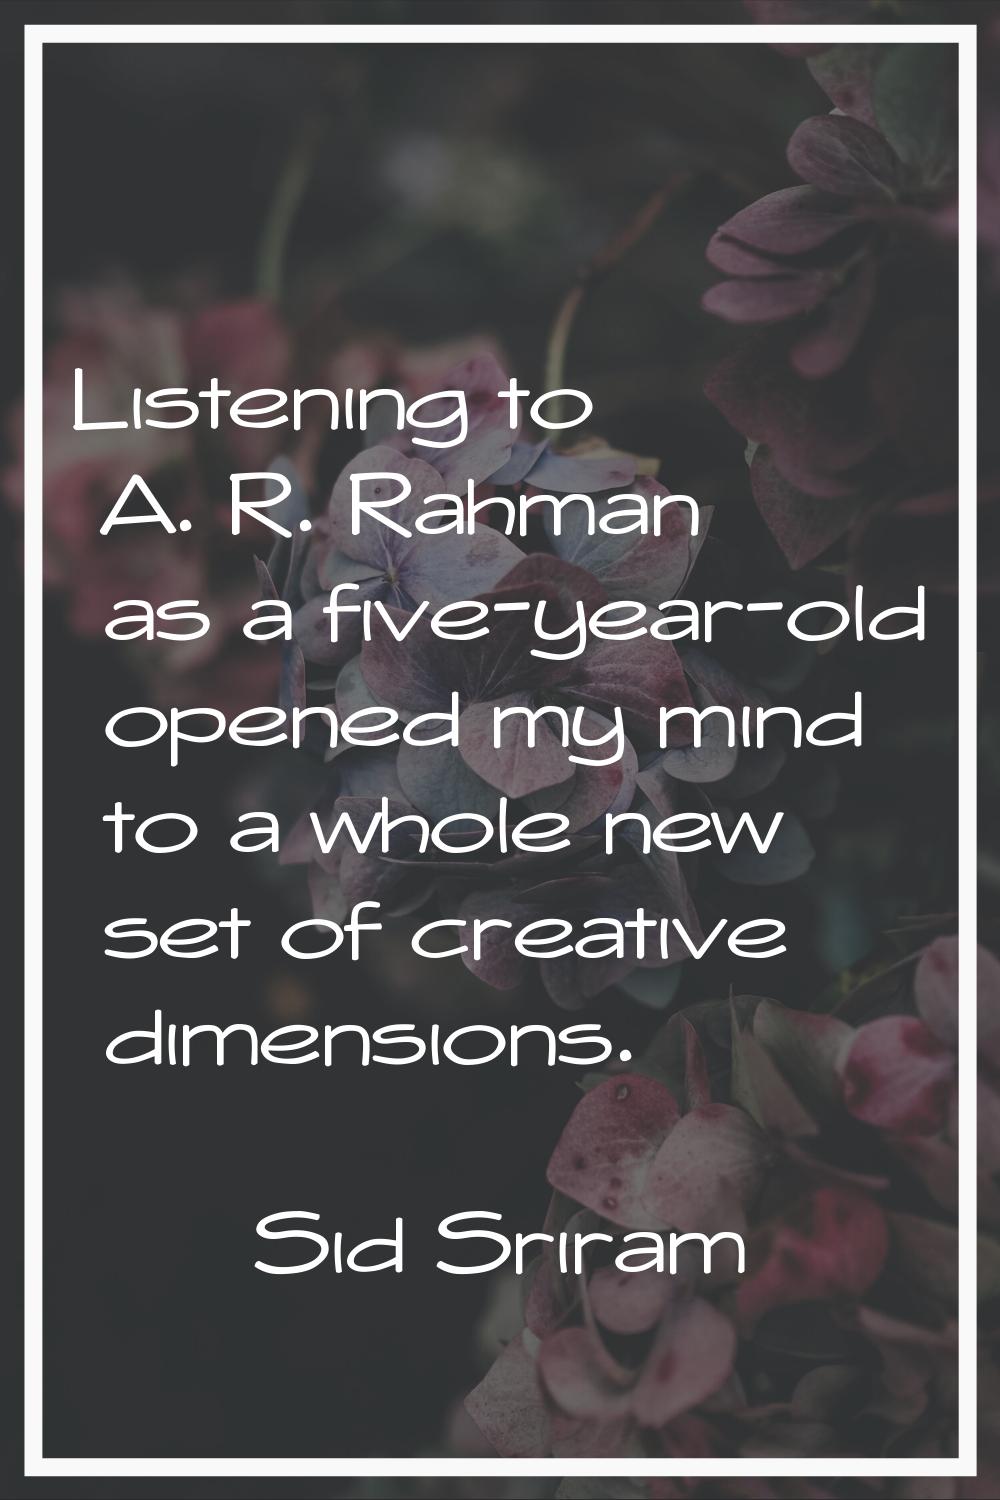 Listening to A. R. Rahman as a five-year-old opened my mind to a whole new set of creative dimensio